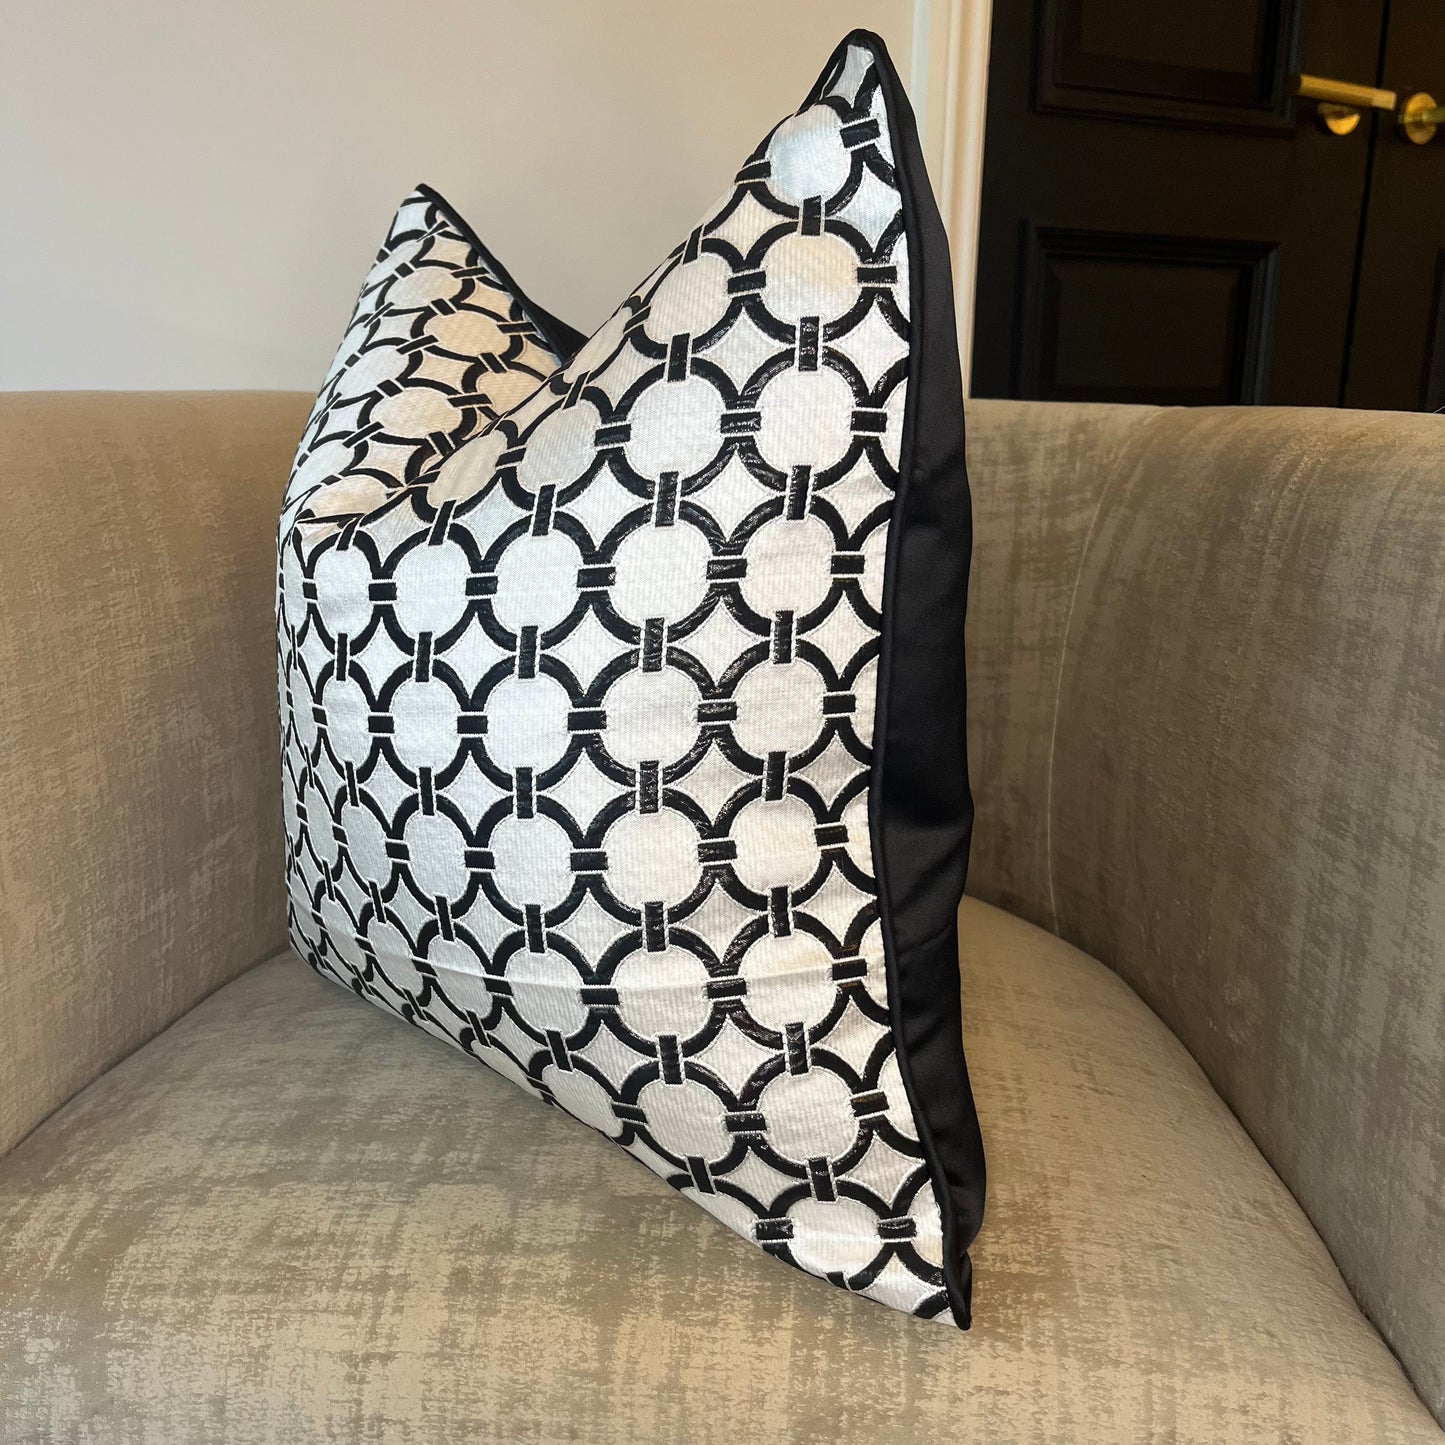 BLAIR Black And White Chain Link Pattern Cushion - LAST ONE